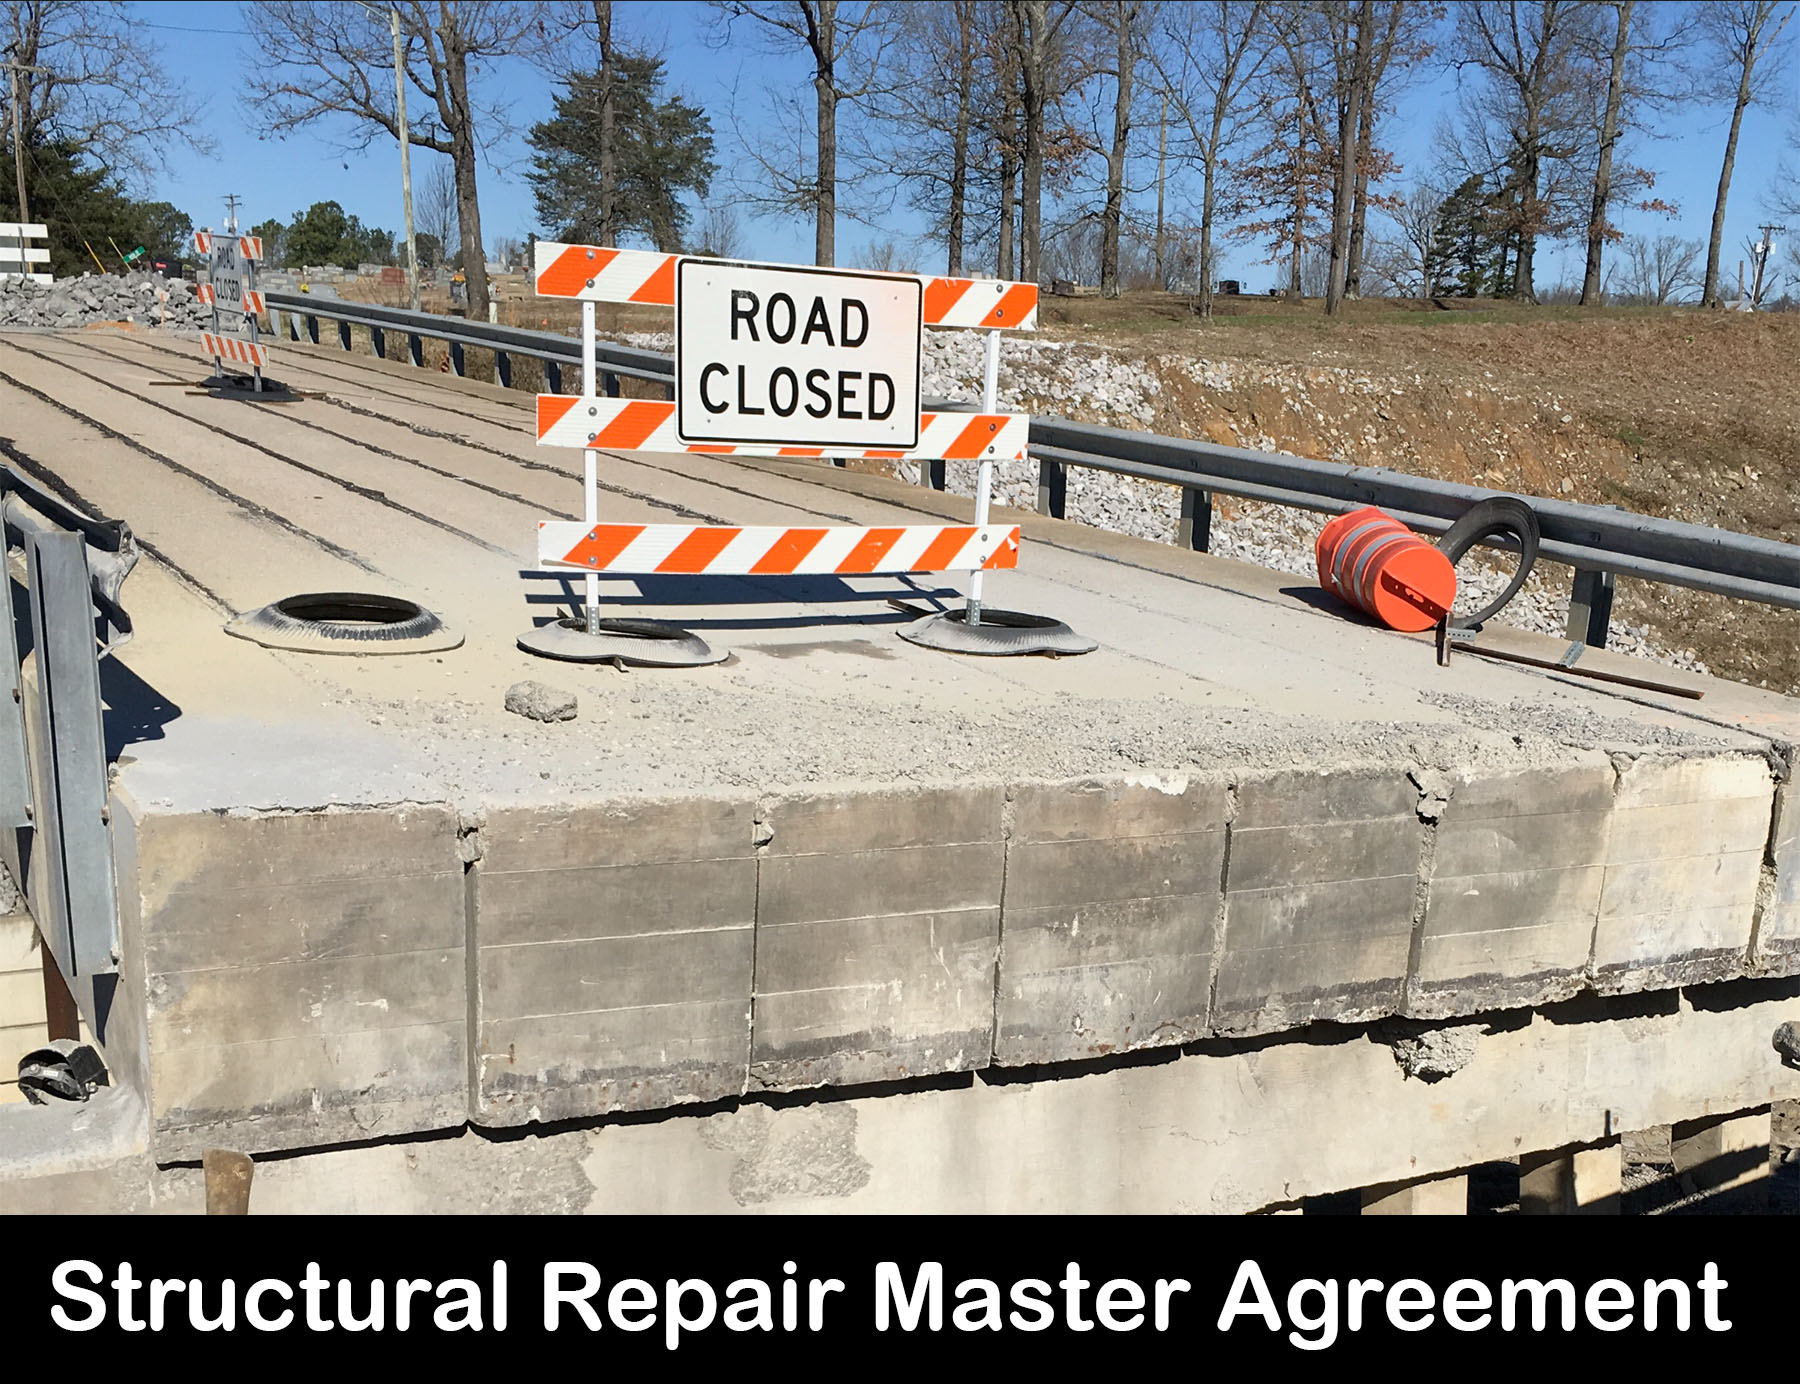 Link to the Structural Repair Master Agreement page